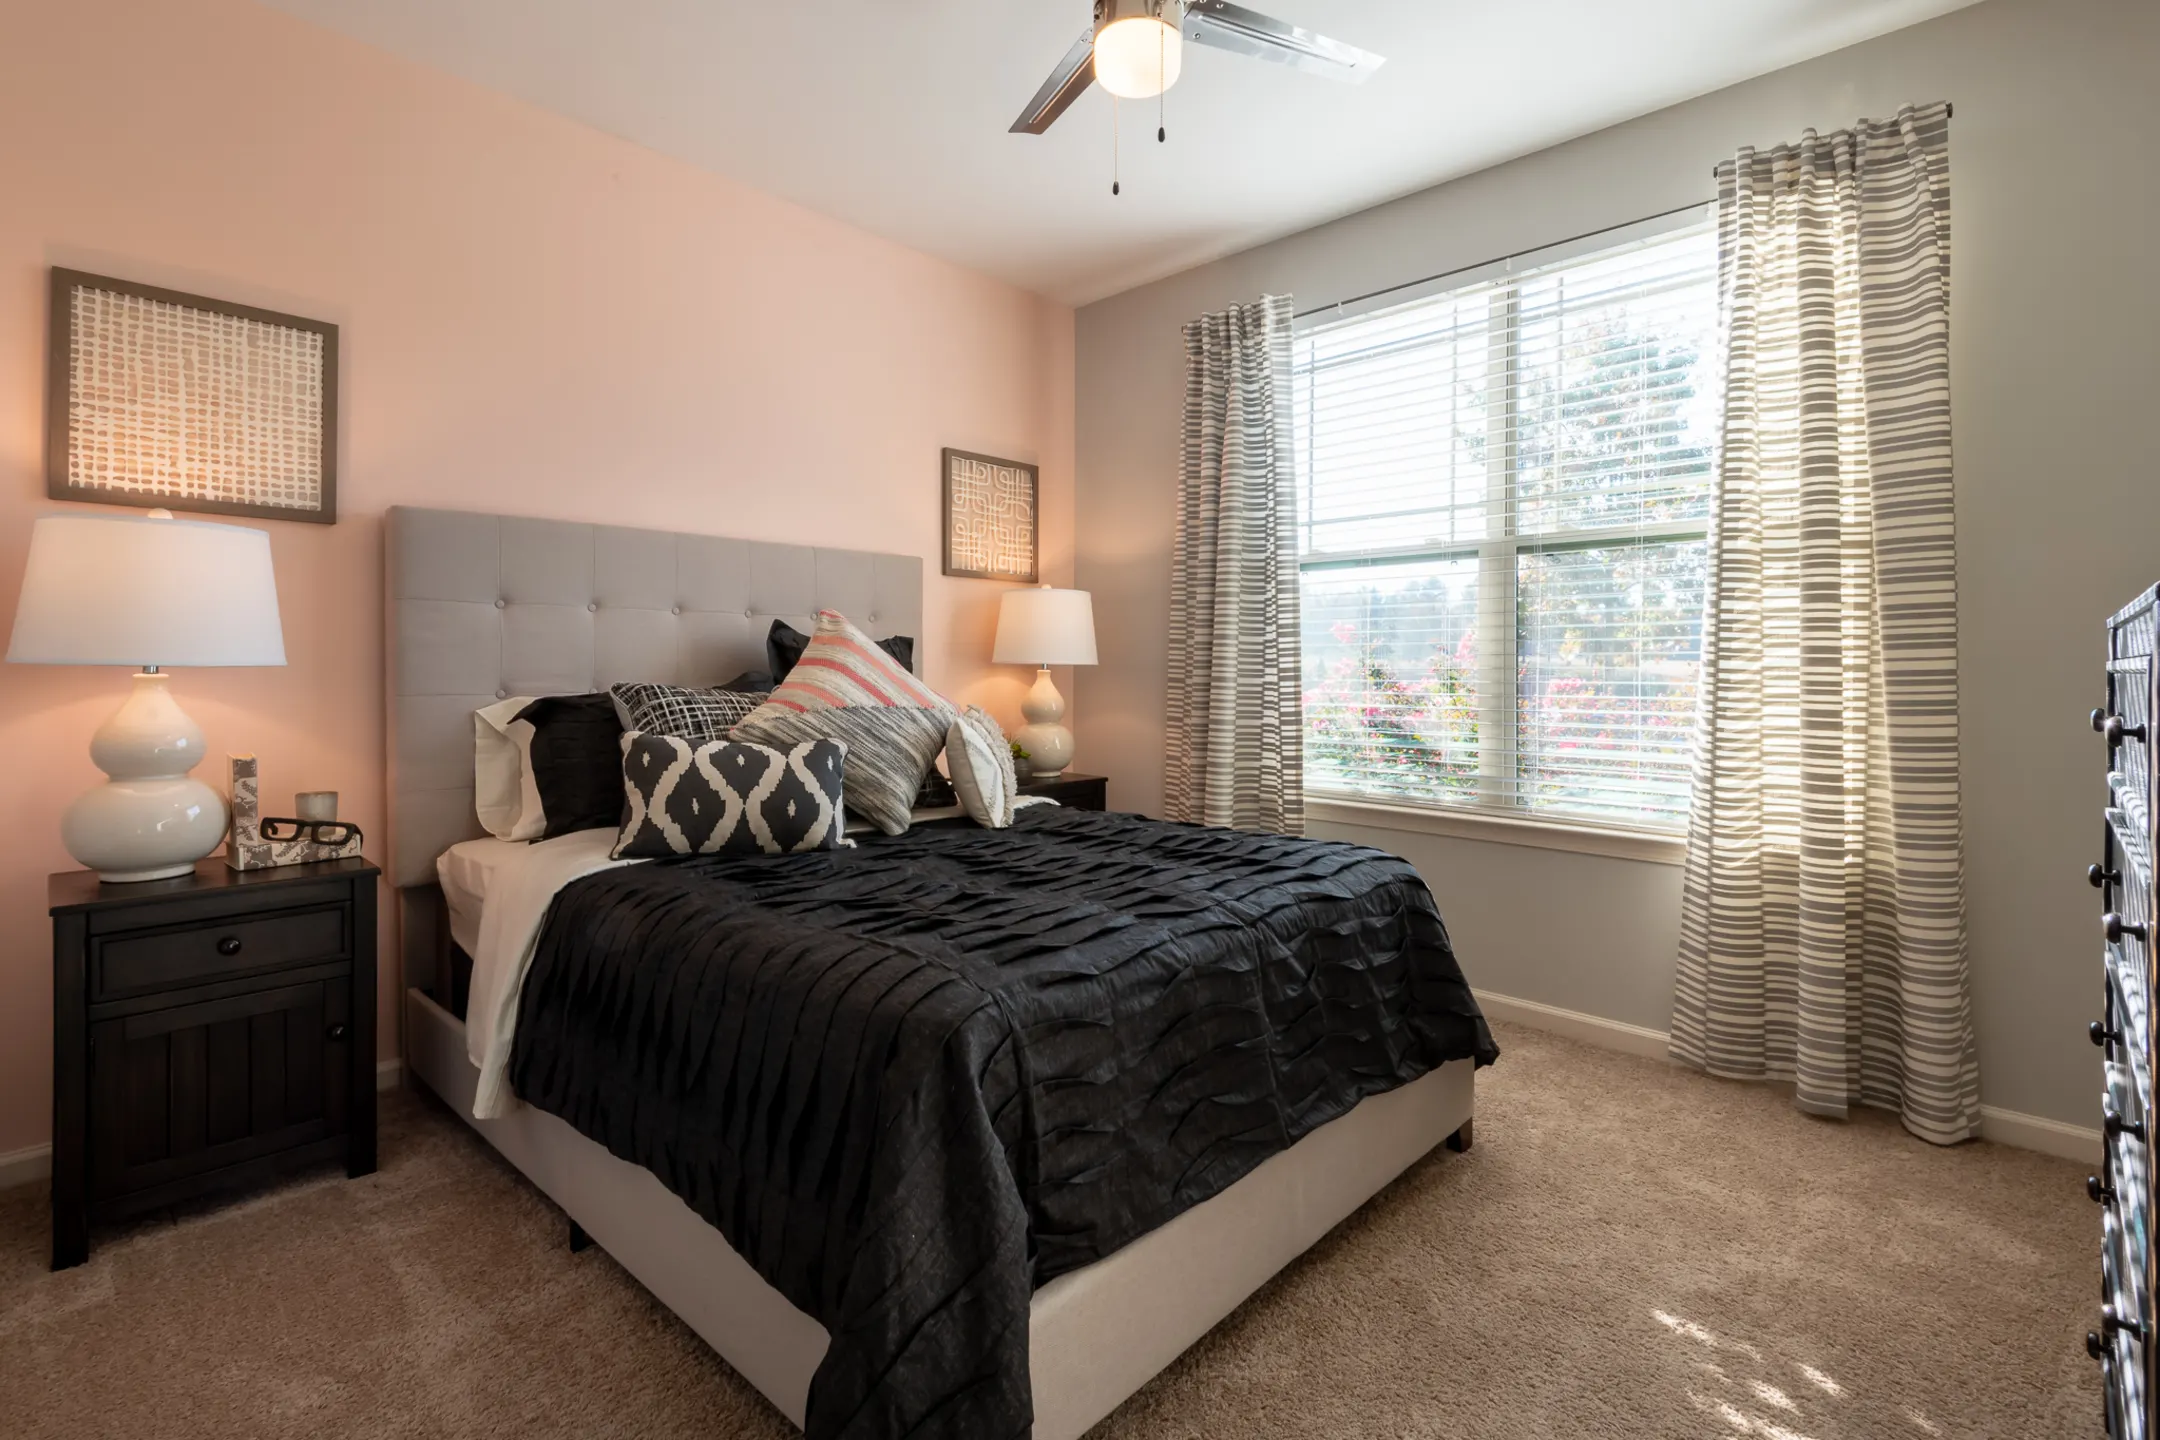 Bedroom - The Crest At Brier Creek Apartments - Raleigh, NC